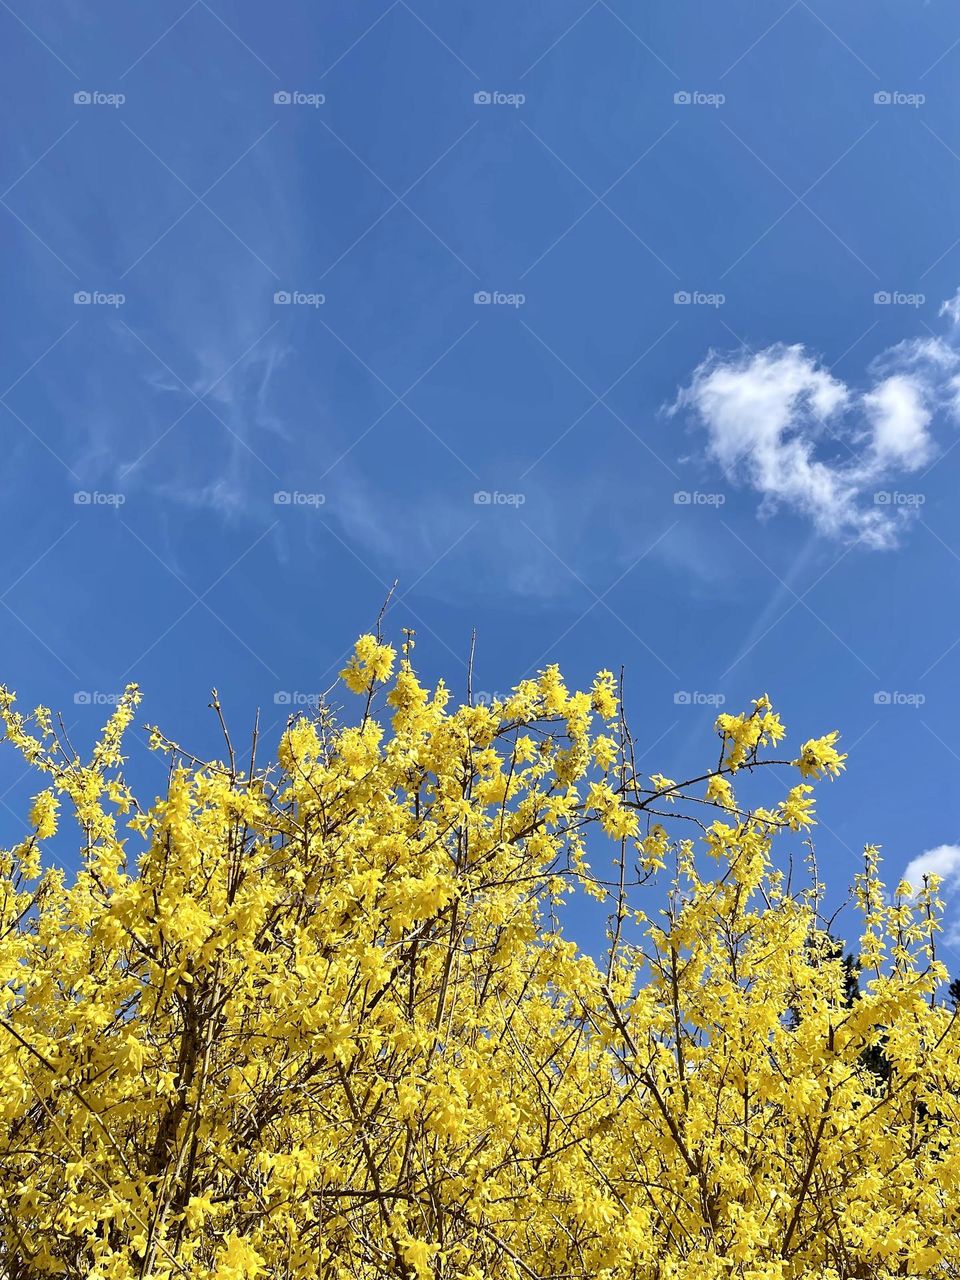 Yellow flowers bush on the blue sky background 